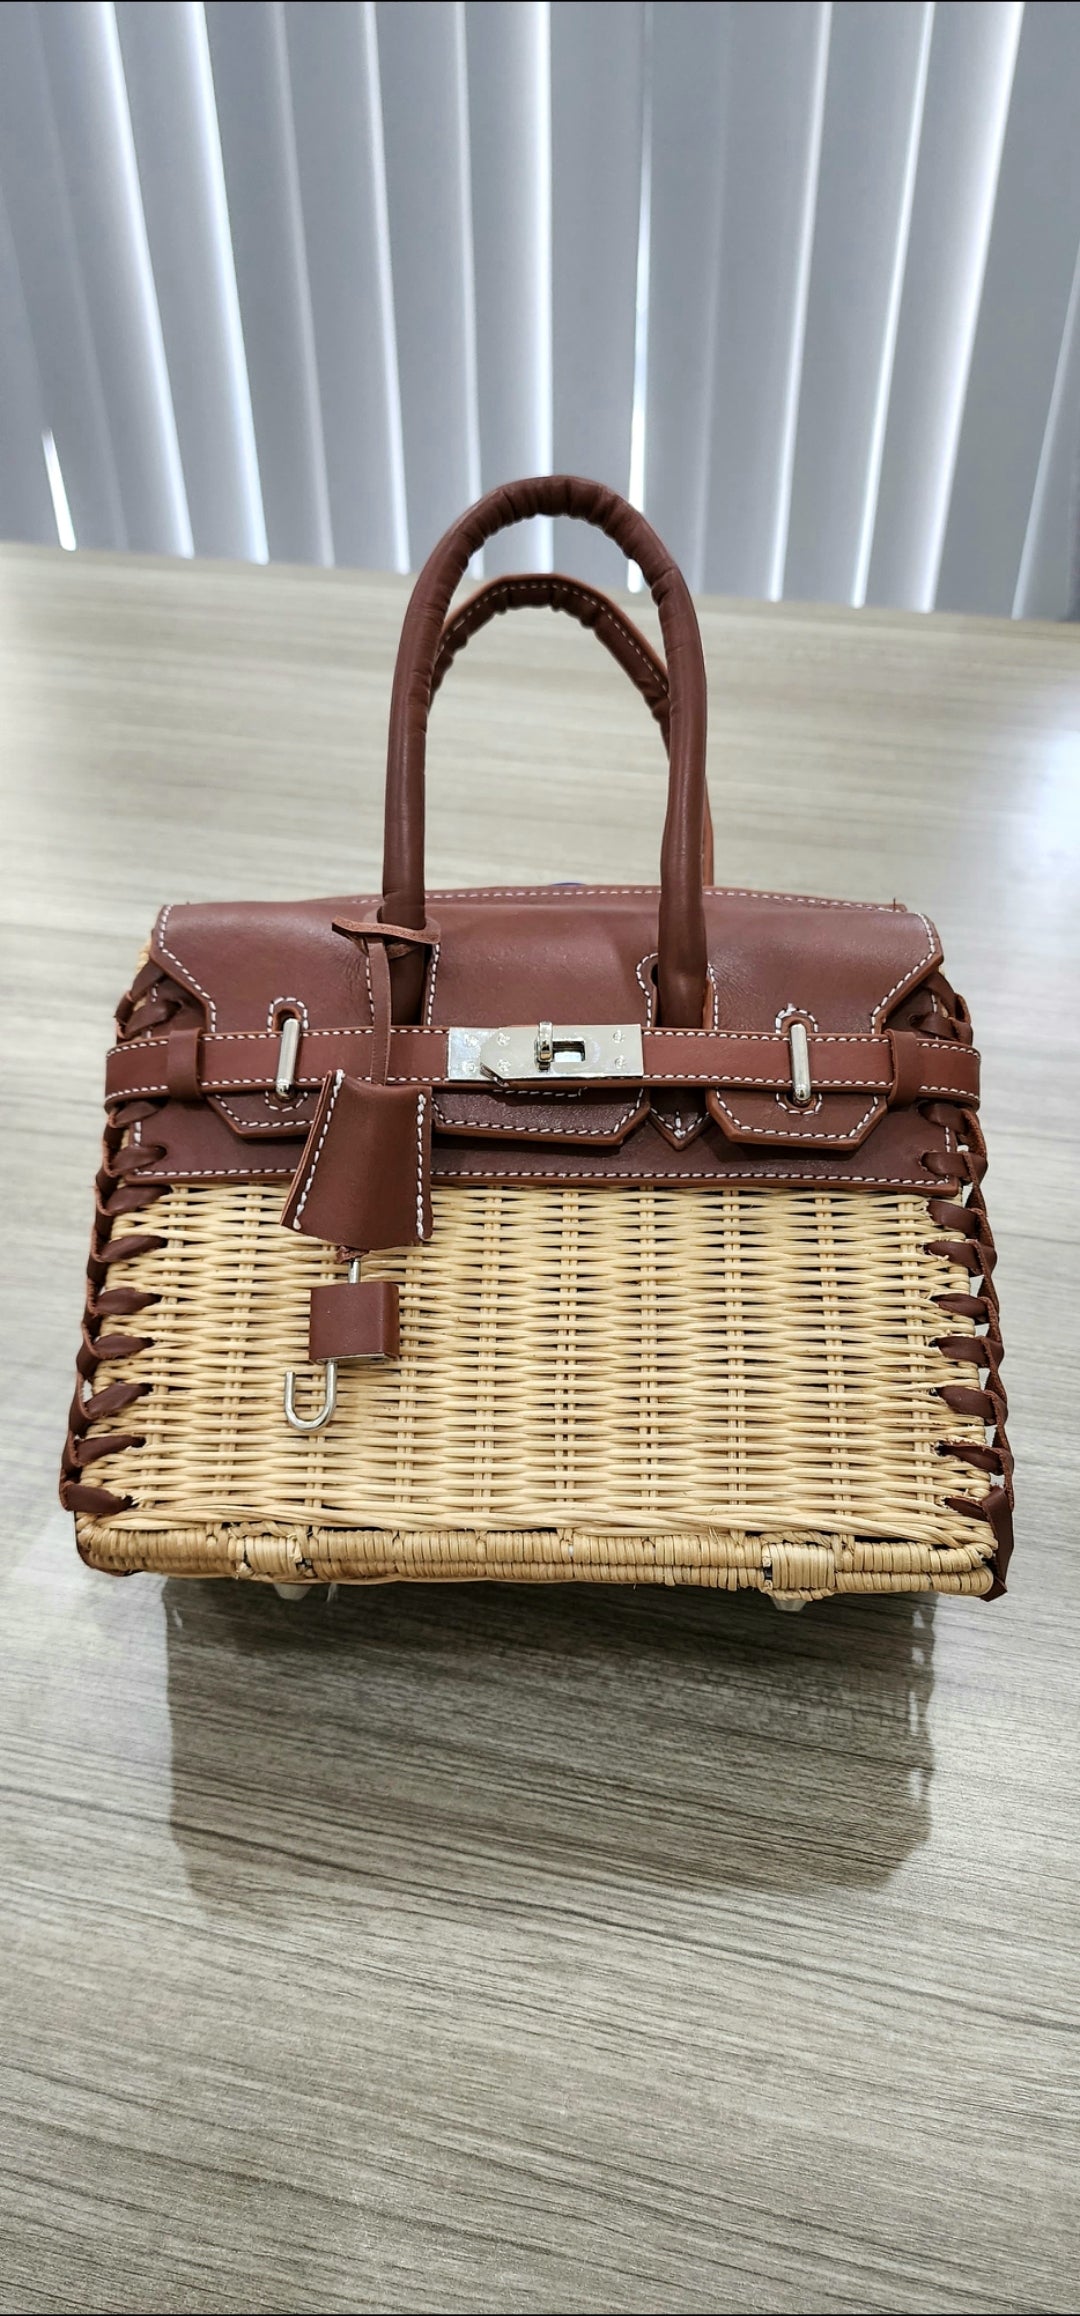 CLEARANCE SALE ! Brown genuine leather - Handmade wicker bag, Small size (25cm)